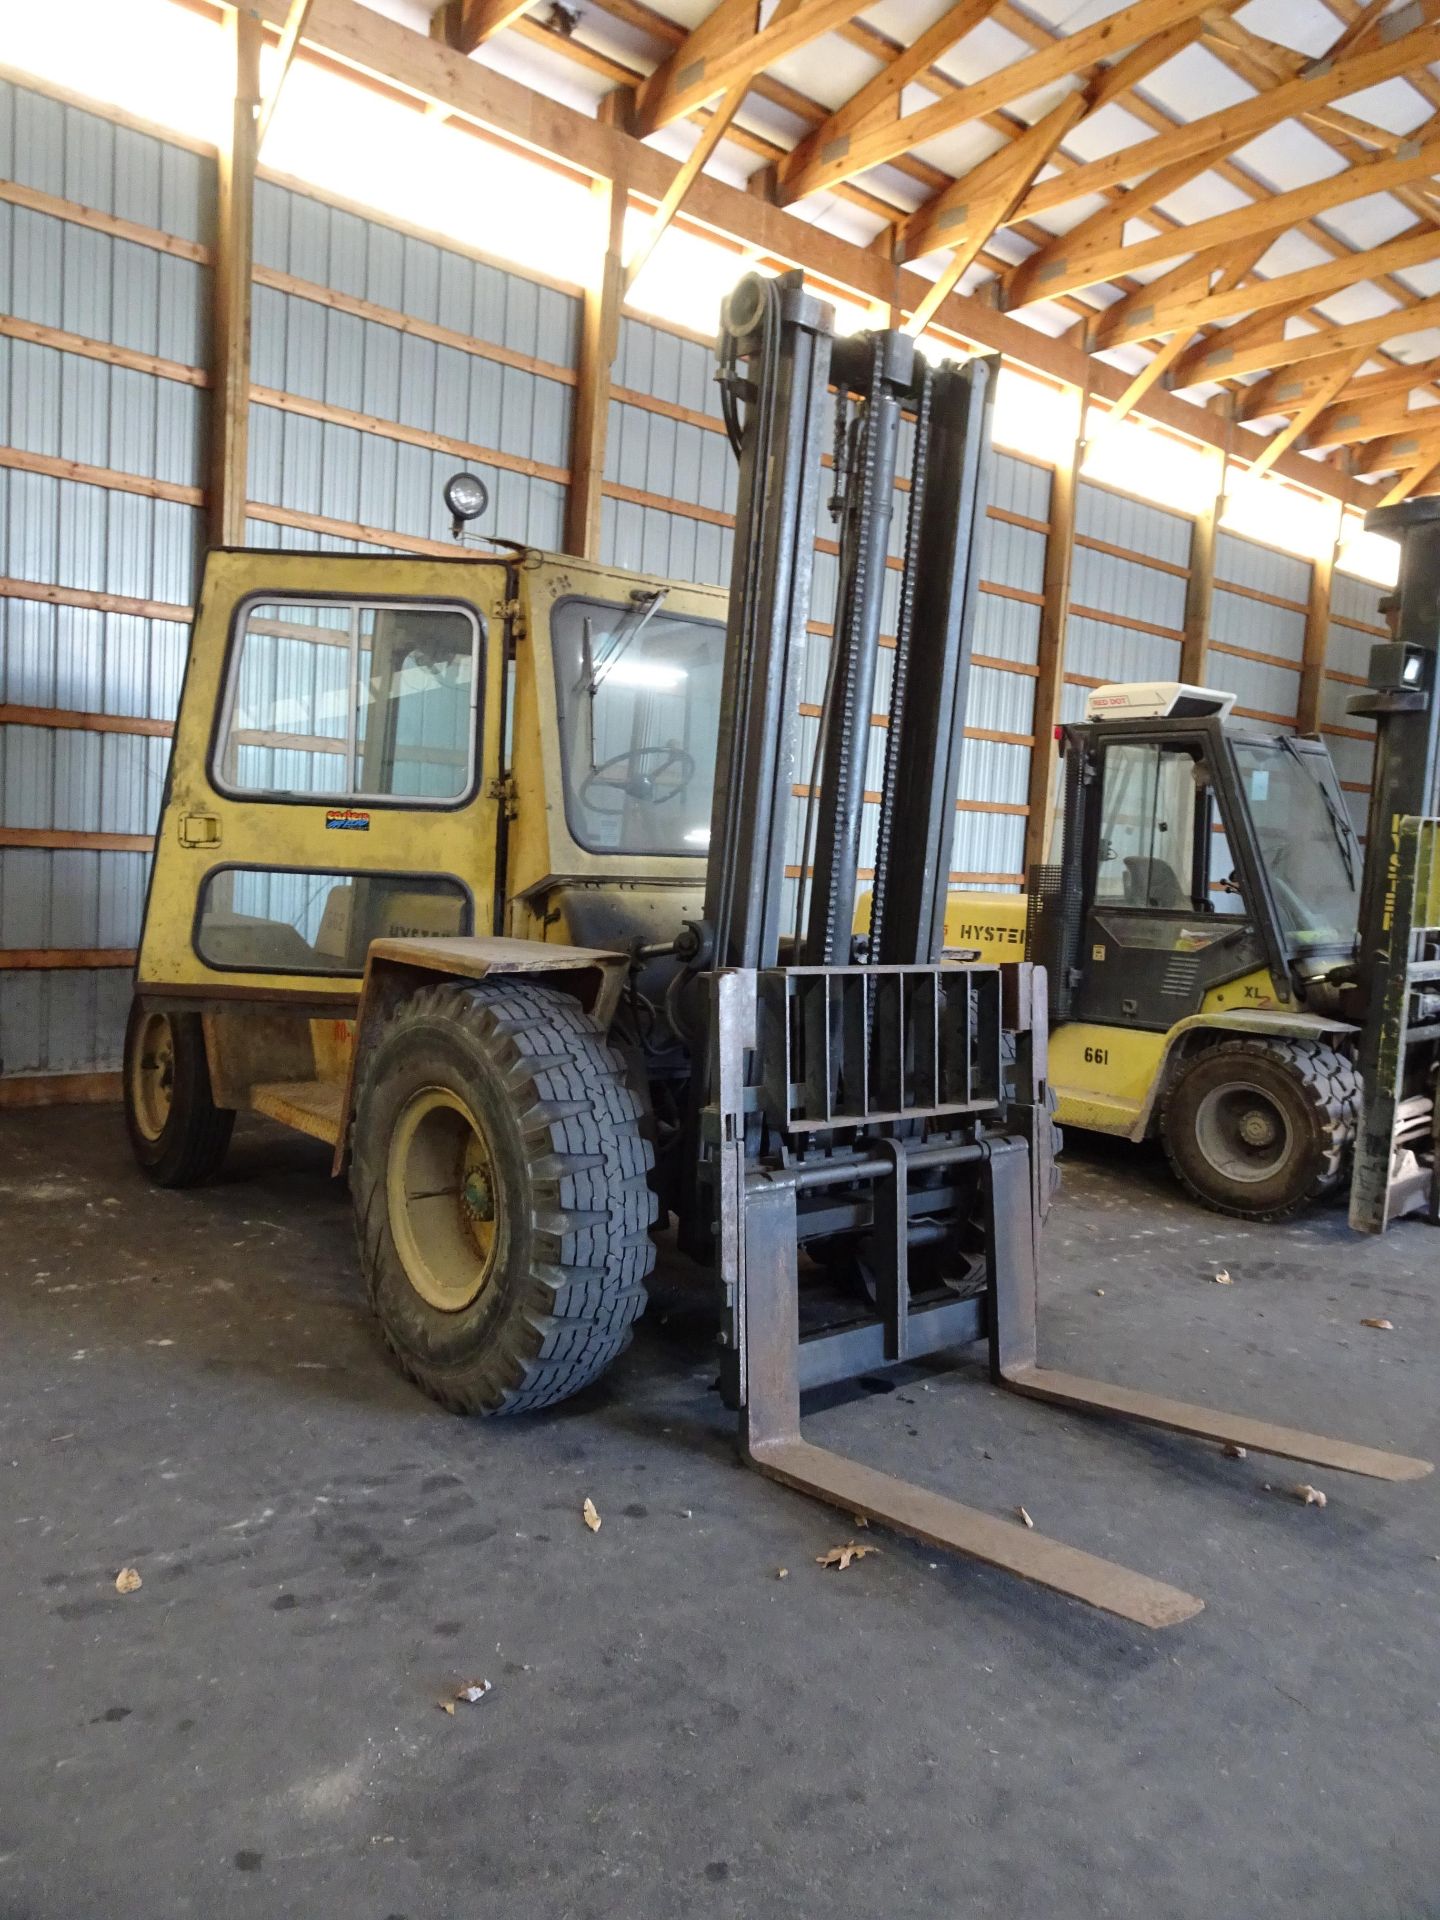 Hyster Model P80A 8,700 lb Capacity Diesel Forklift - Image 2 of 4